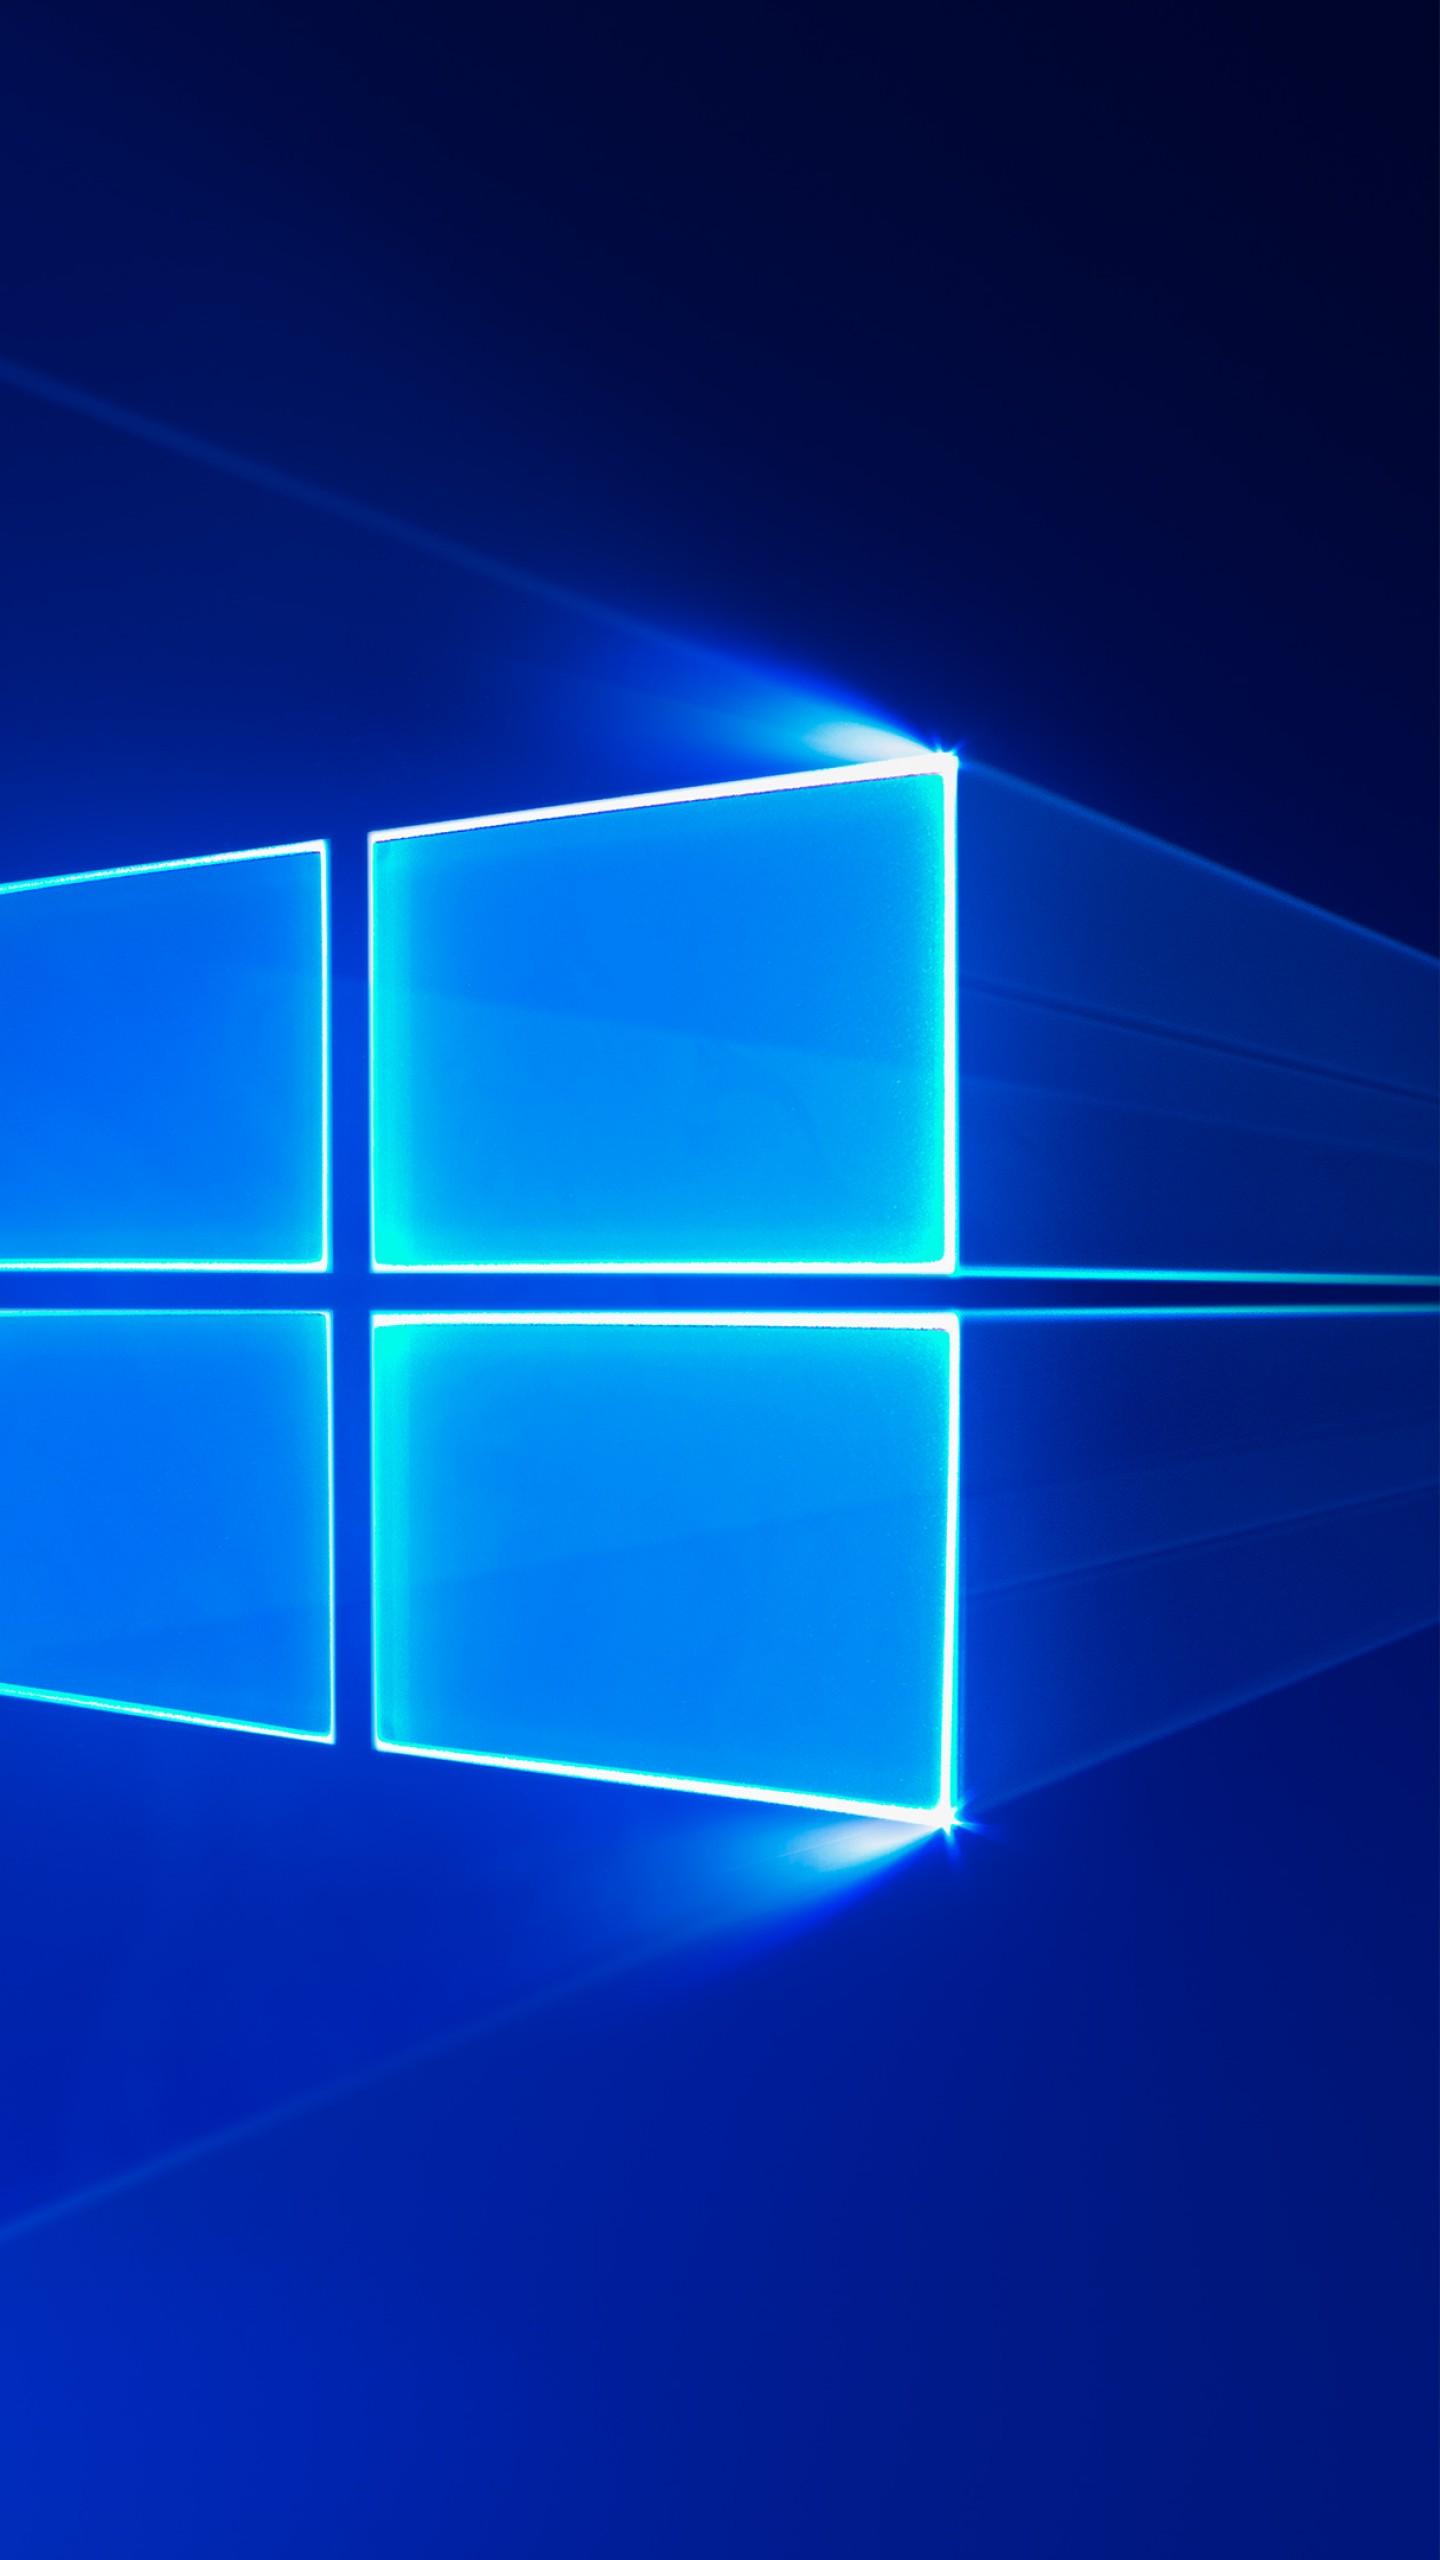 Wallpaper Windows 10 S, Stock, Blue, HD, 4K, Technology / Editor's Picks,. Wallpaper for iPhone, Android, Mobile and Desktop